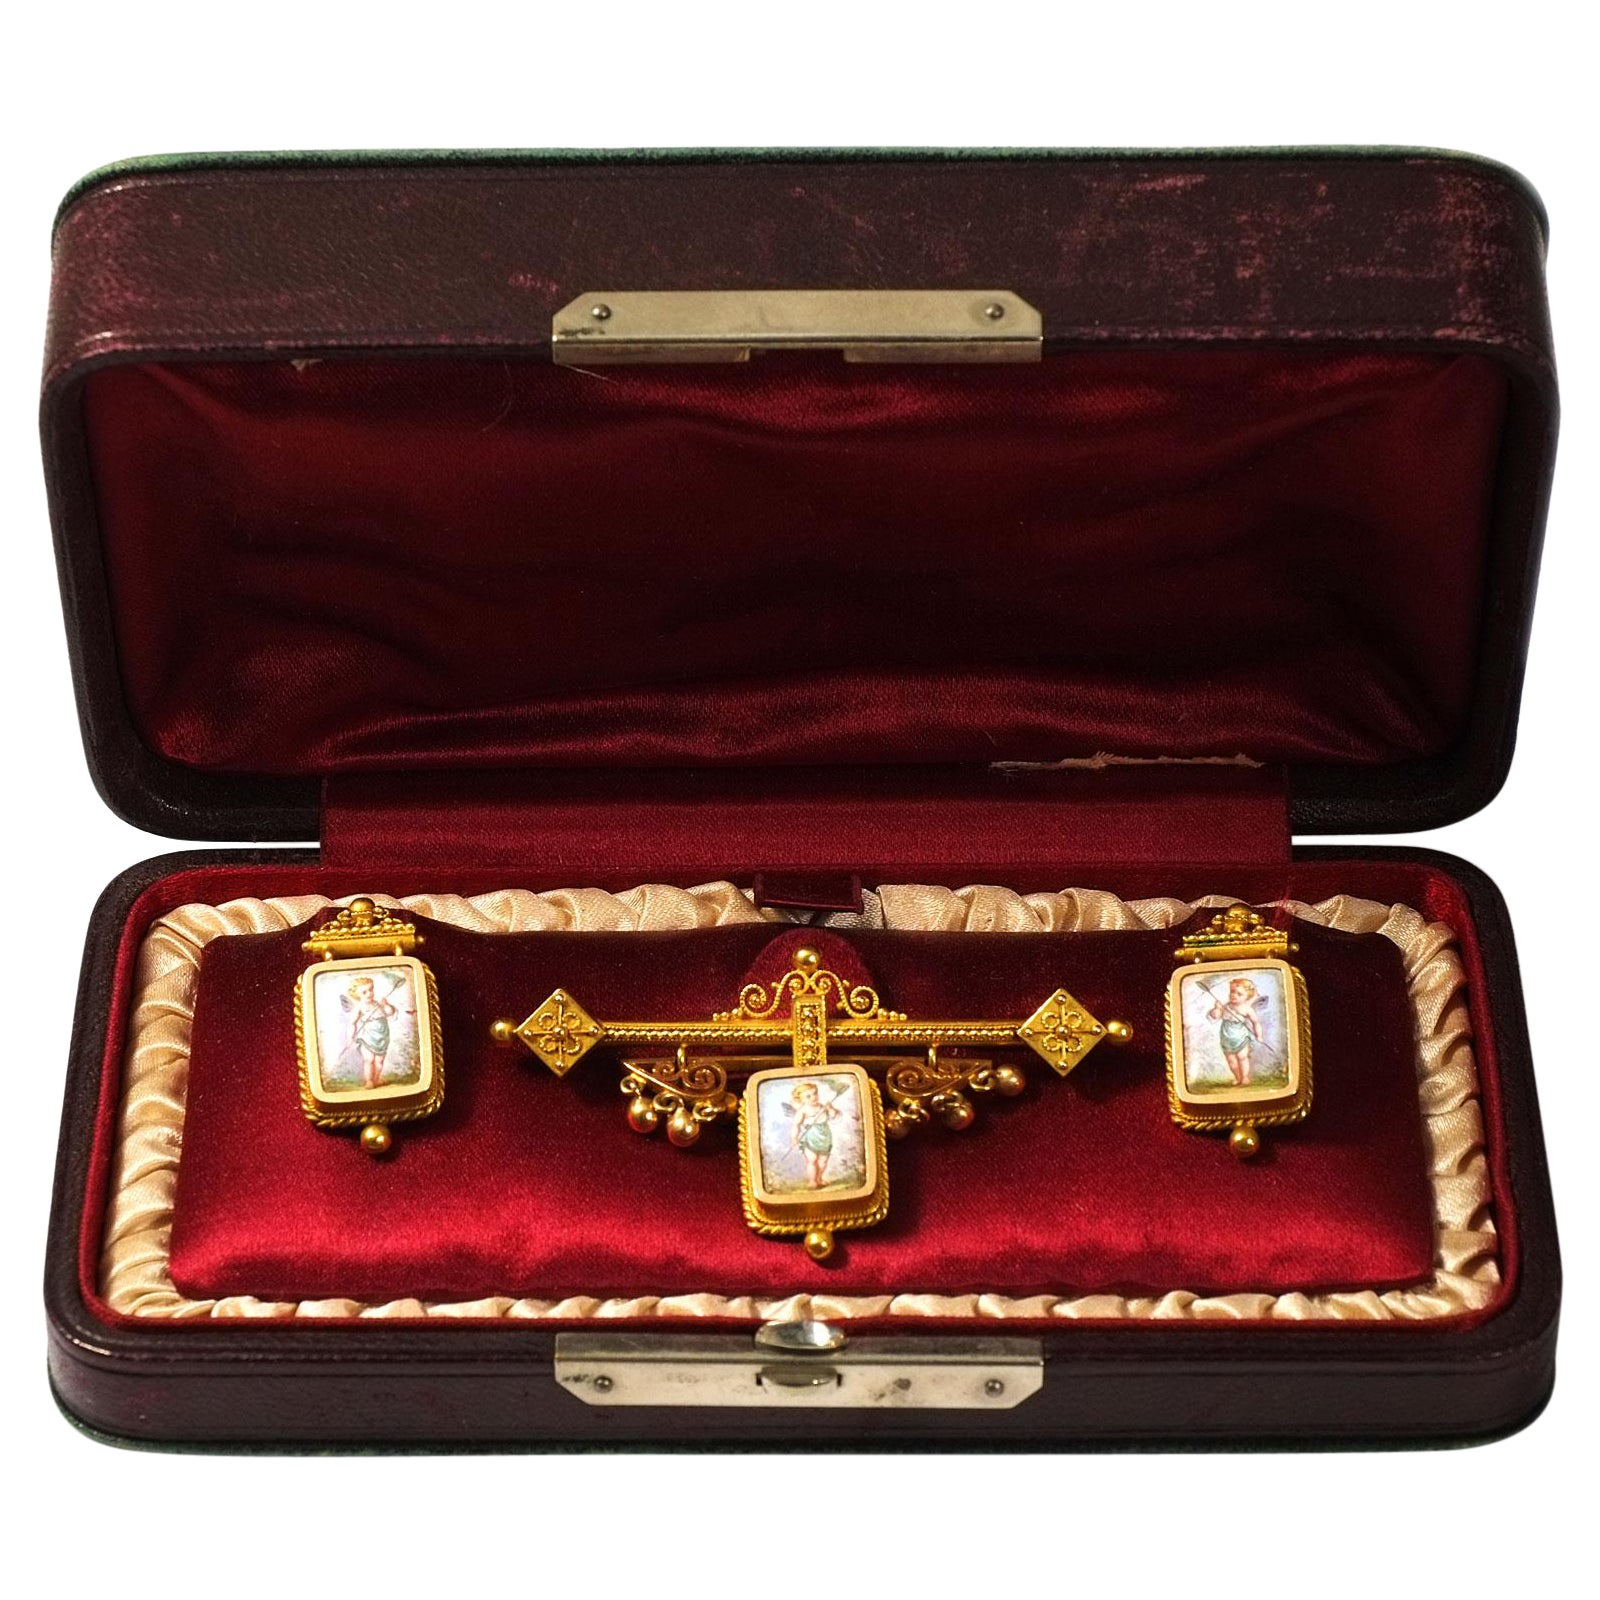 Swiss Gold Demi Parure Earrings and Brooch with Miniature Painting, circa 1870